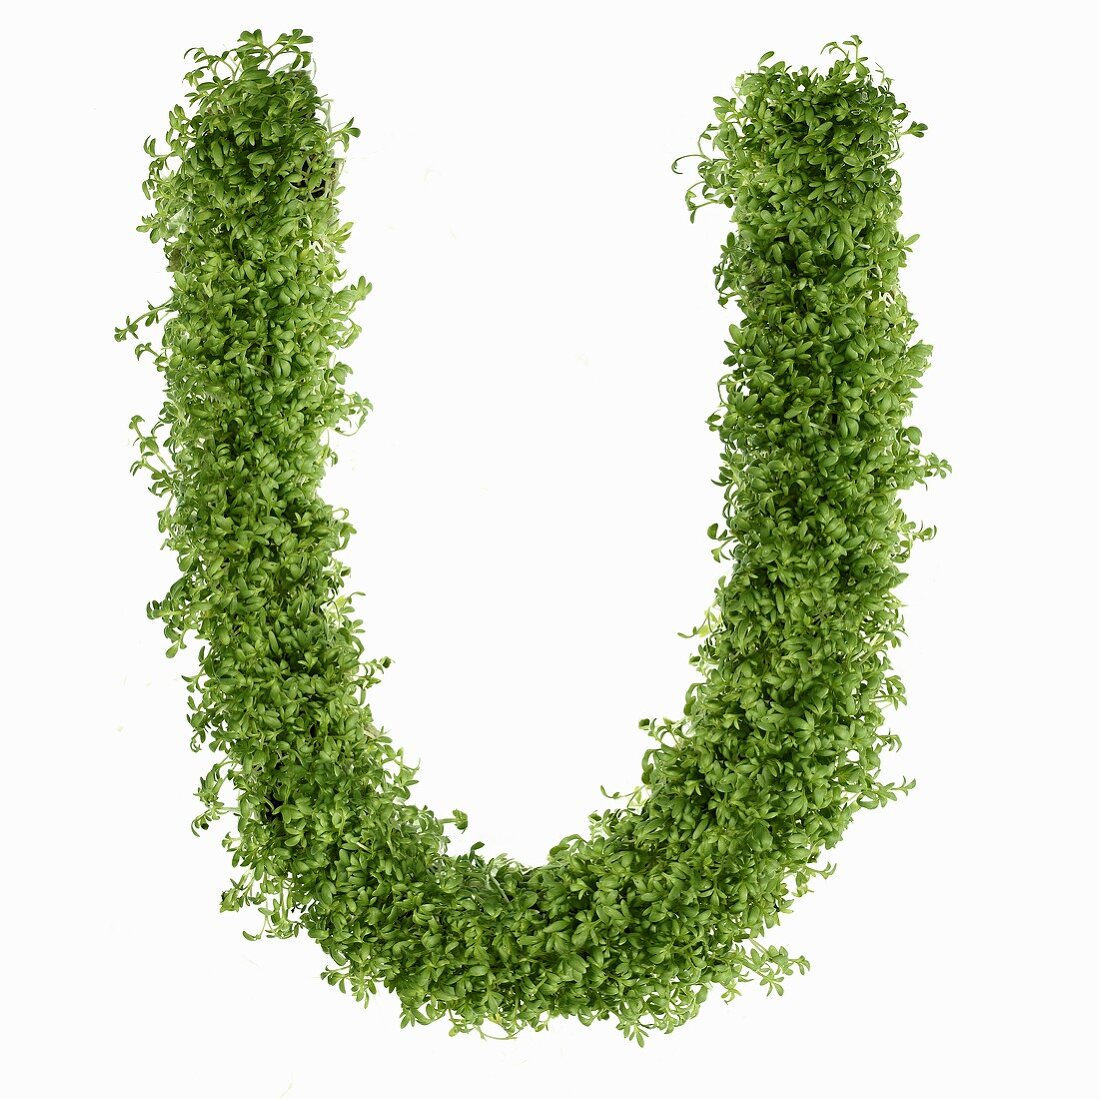 The letter U in cress